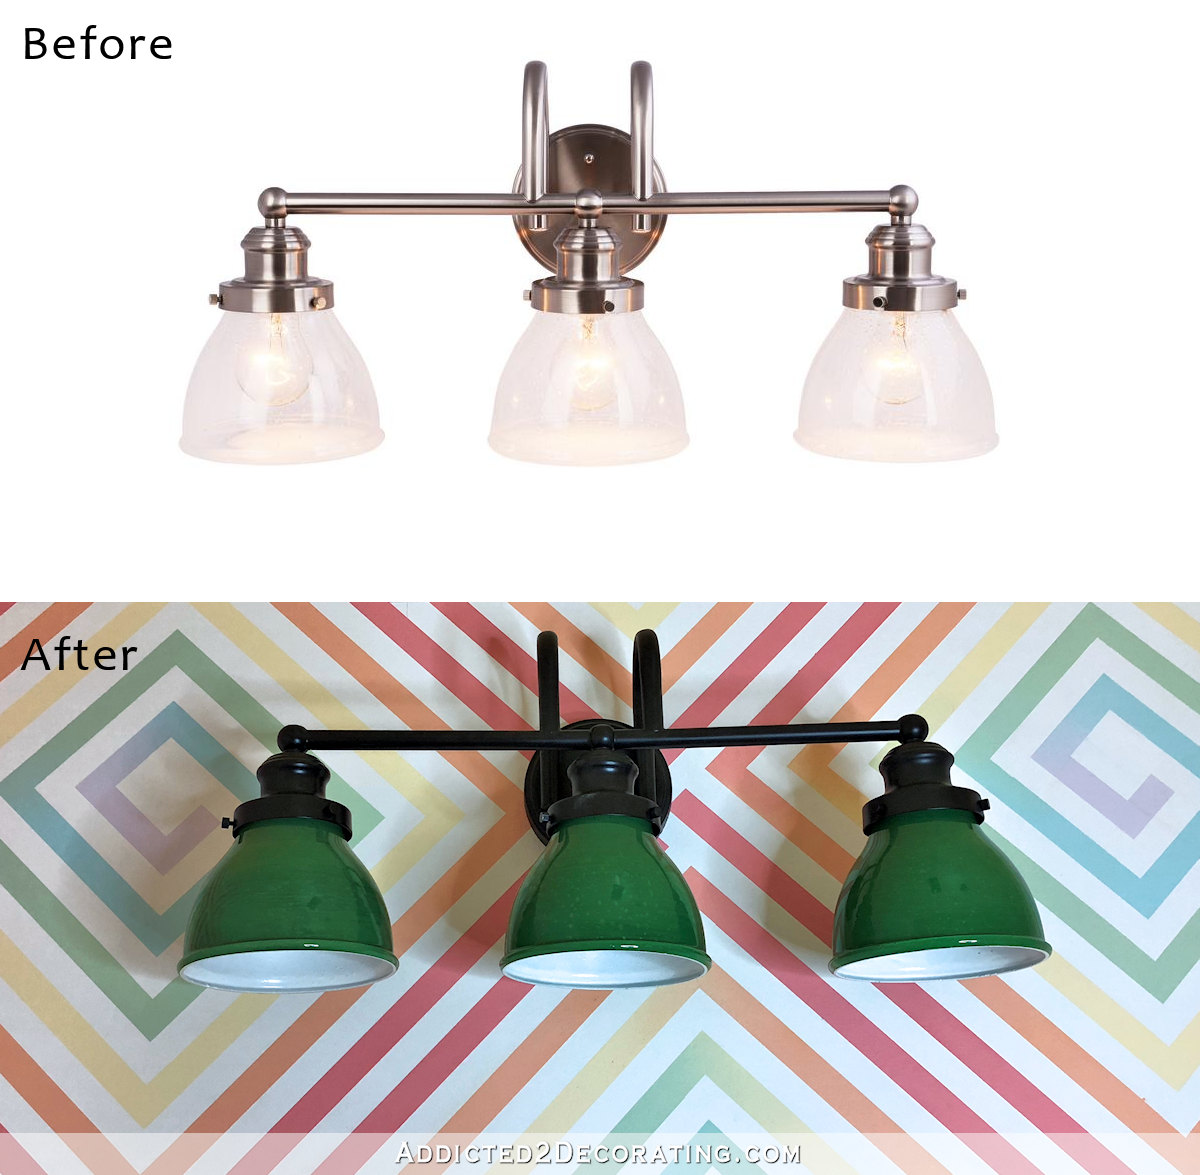 Bathroom vanity light makeover - from chrome with clear glass to black with green glass